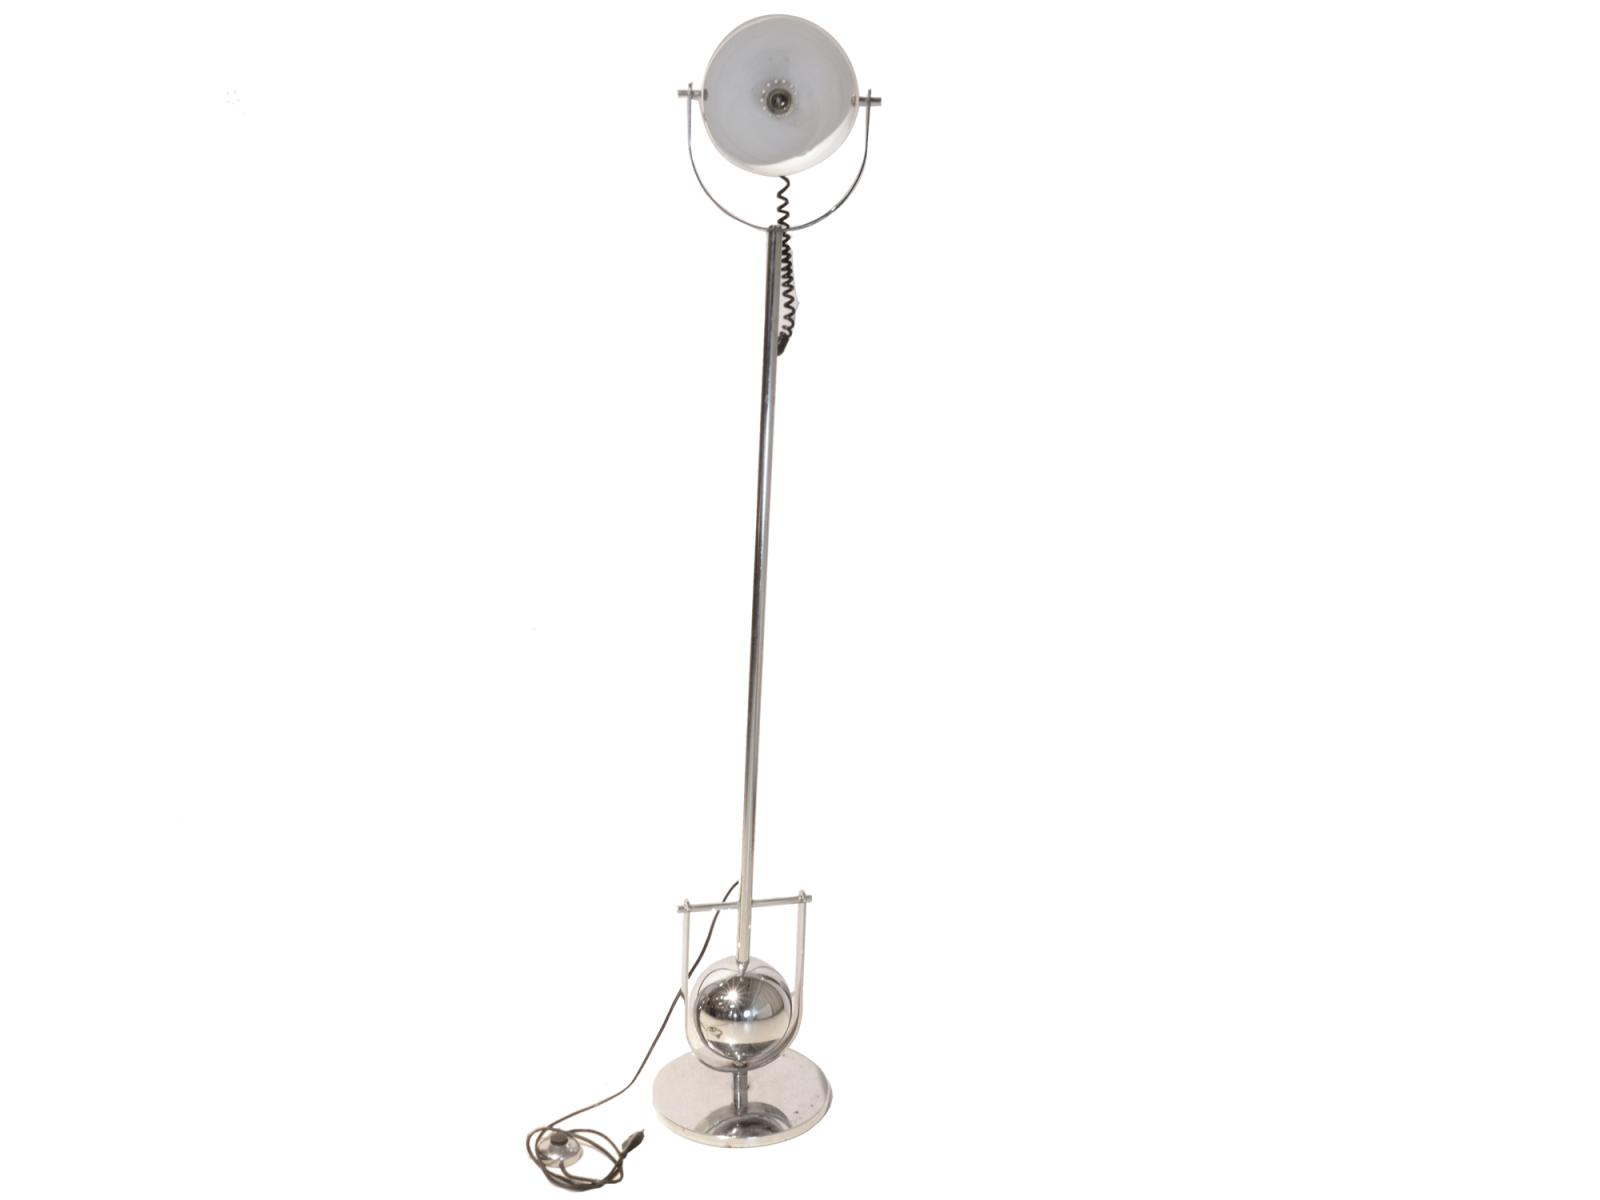 Stainless Steel Floor Lamp by Claudio Salocchi, 1960s for sale at Pamono